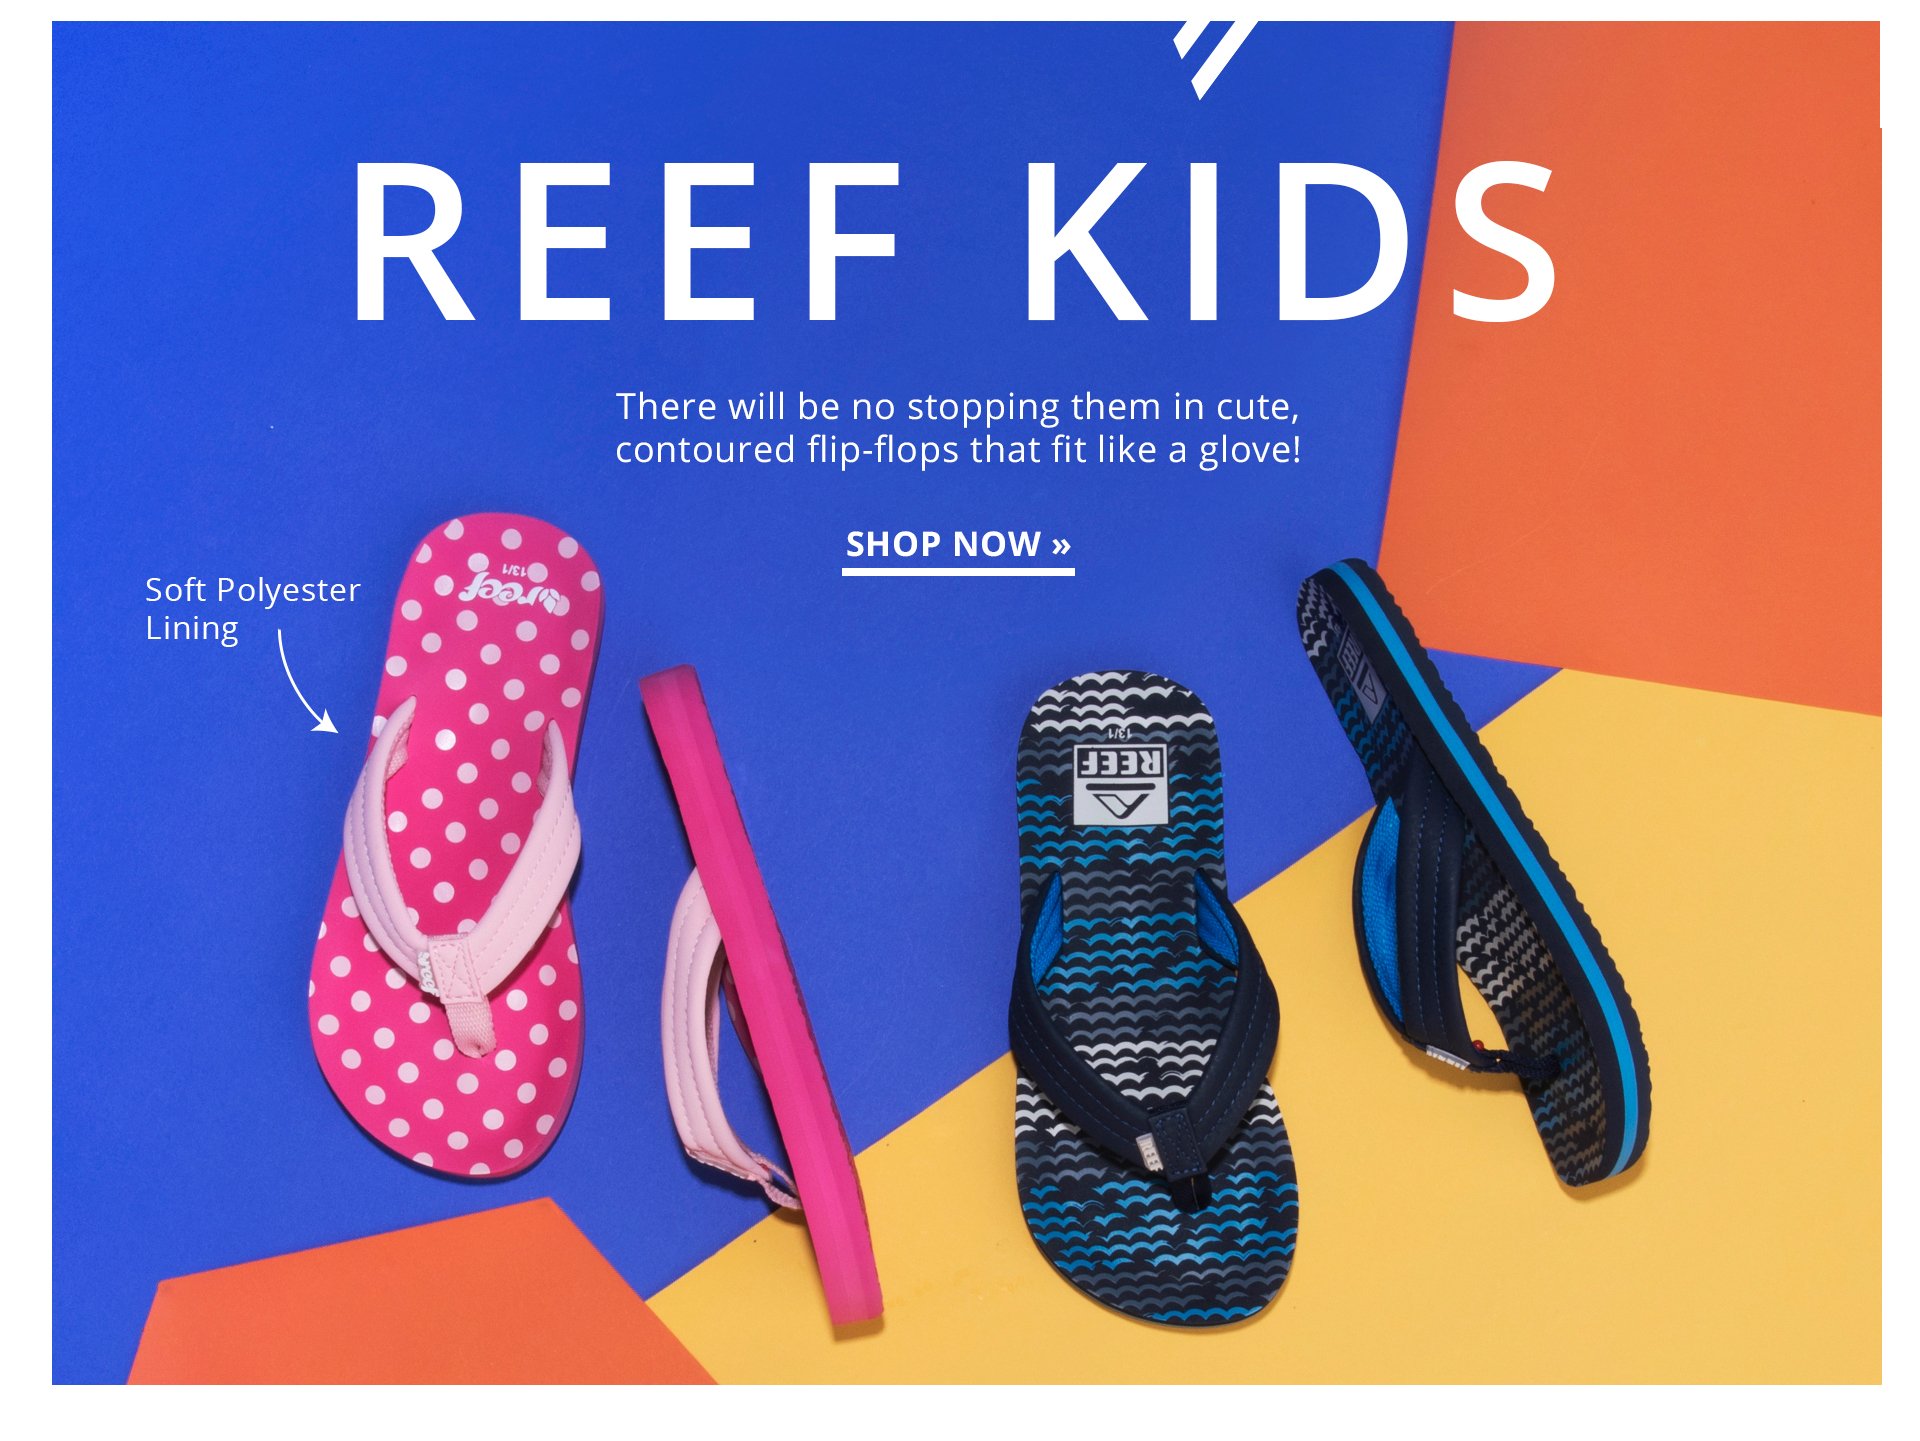 Reef Kids. There will be no stopping them in cute, contoured flip-flops that fit like a glove! Shop Now.